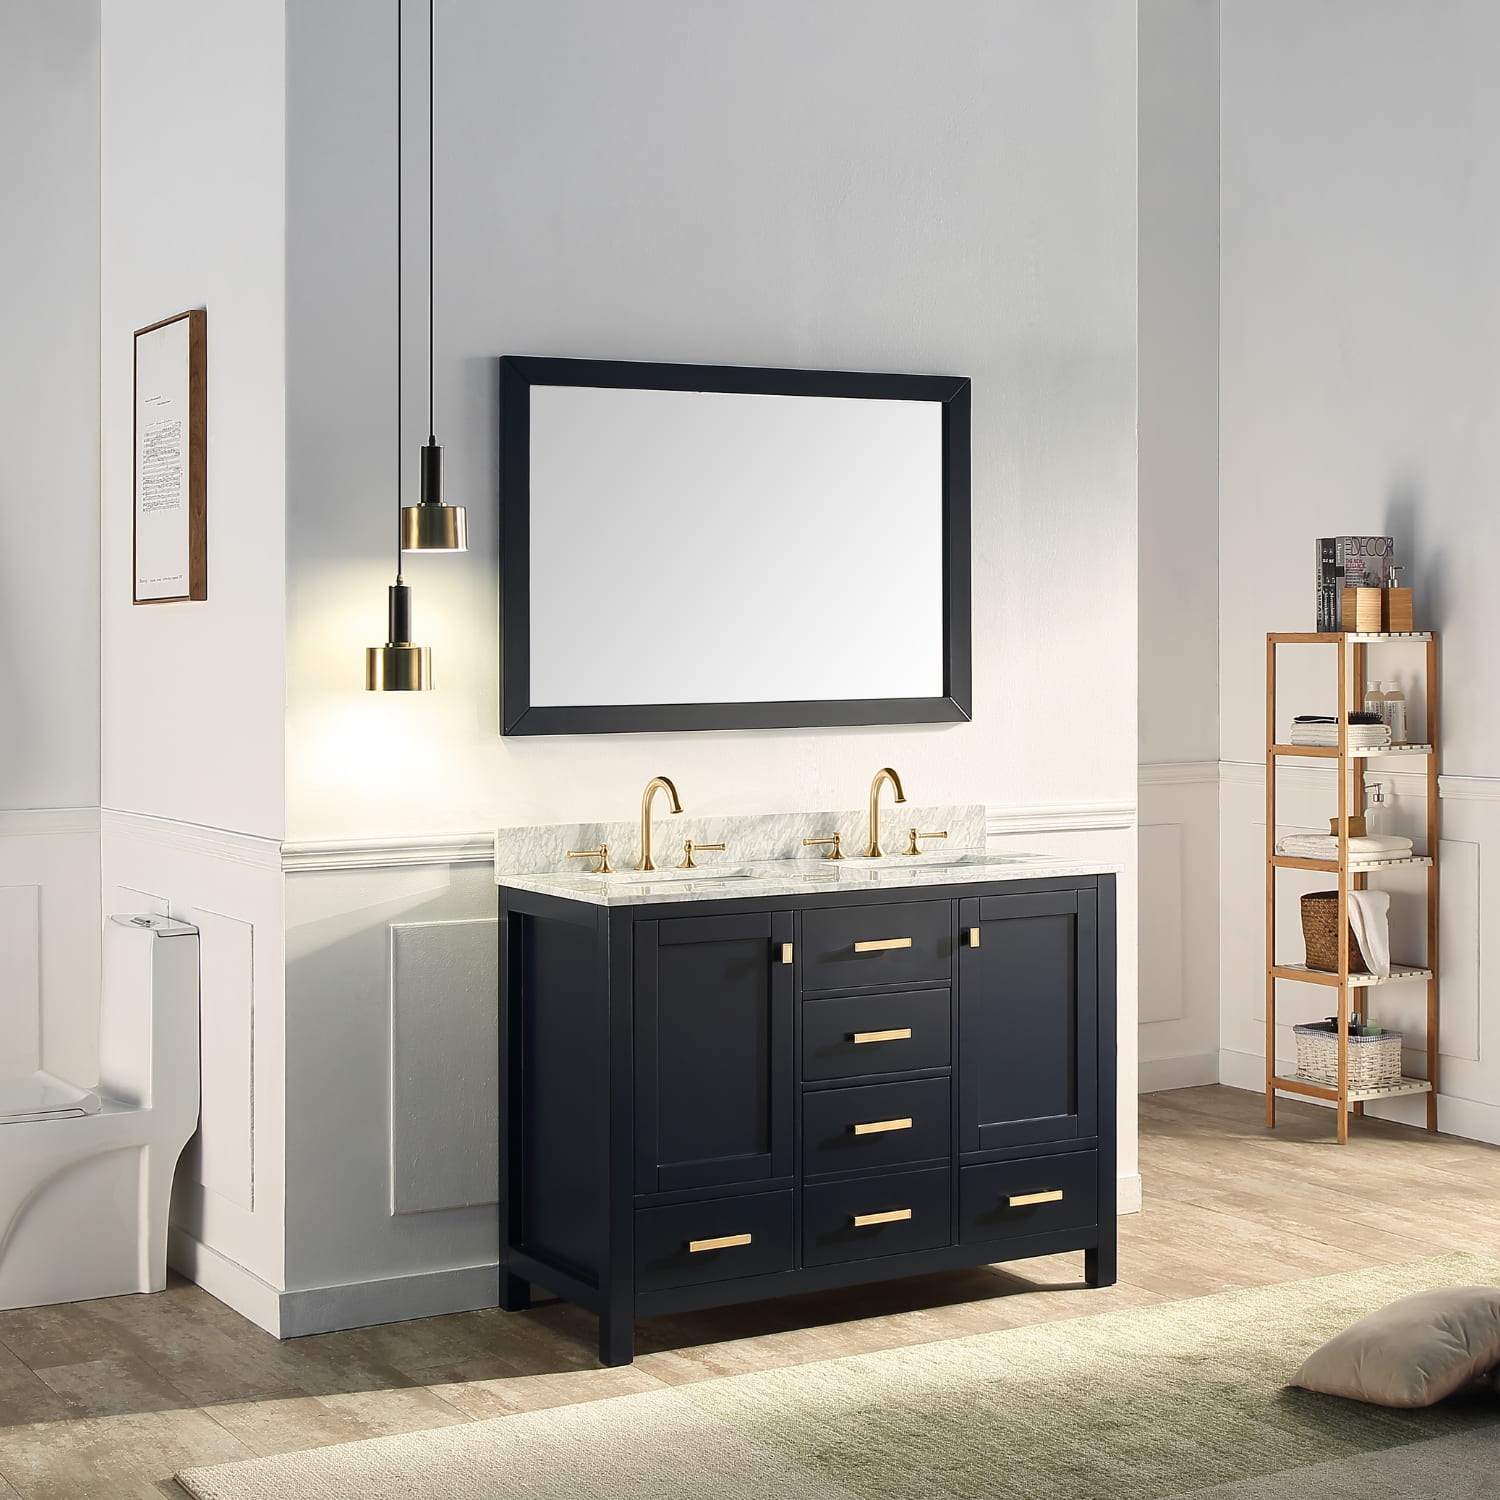 CASAINC 48 x 20 x 35.4 in. Two Sink Bathroom Vanity in Navy Blue with Mirror, With Carrara White Marble Countertop